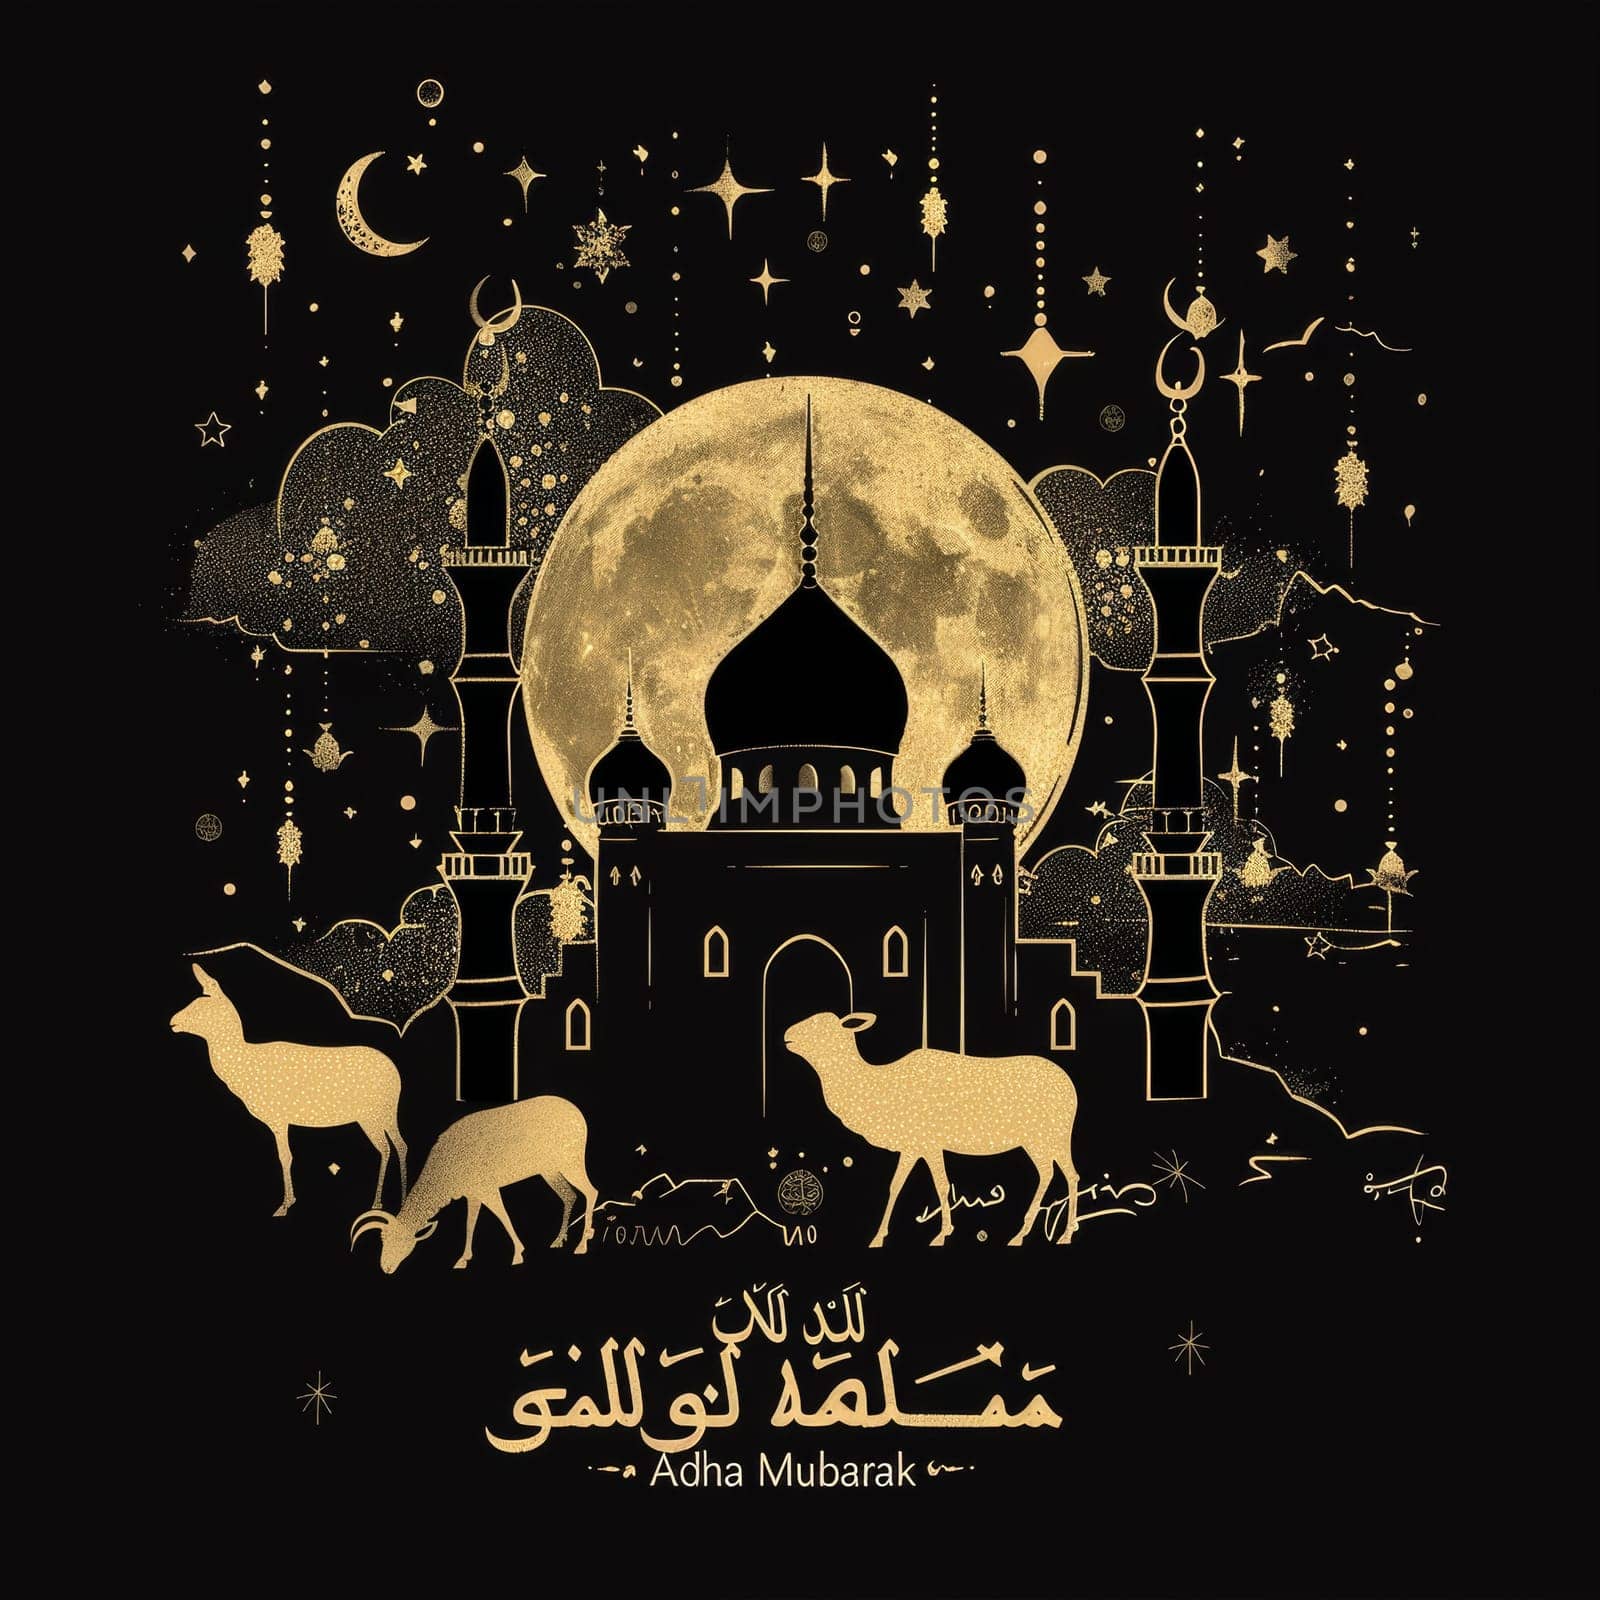 Artistic Eid al Adha design featuring a mosque with golden accents, animals silhouettes, and an intricate crescent moon. by sfinks